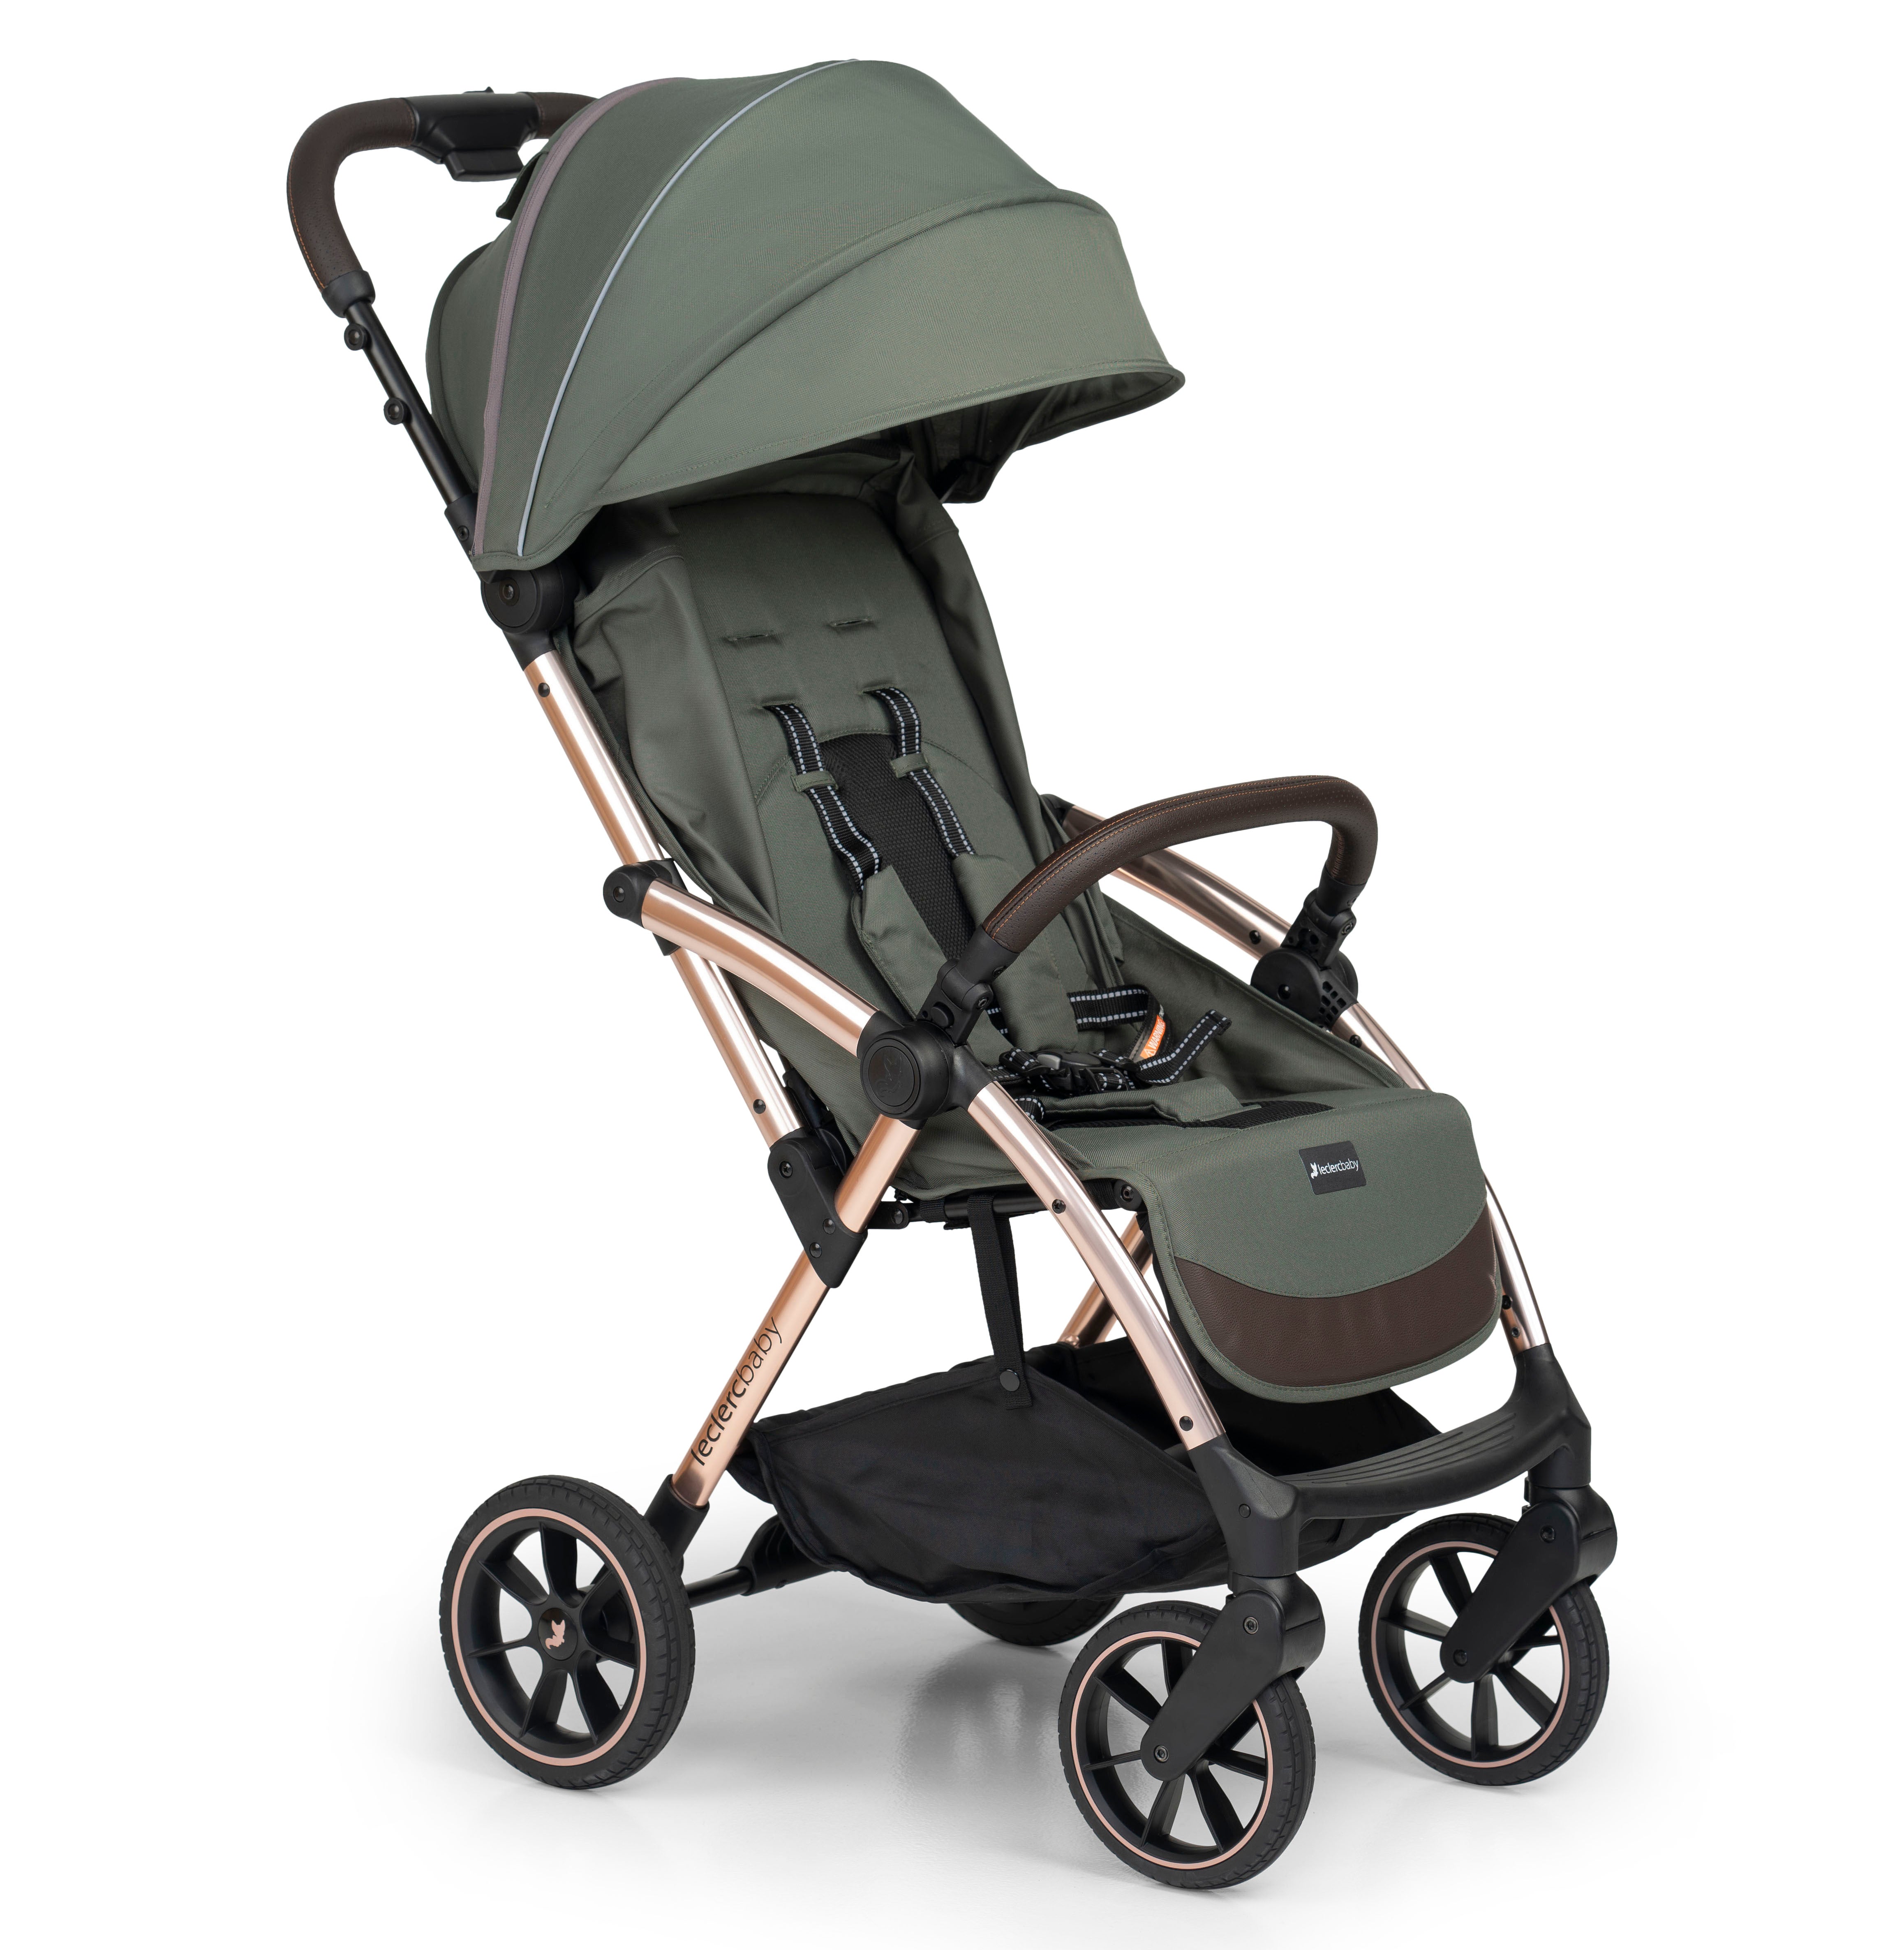 Leclerc Baby Influencer XL Stroller - Tiny Tots Baby Store 